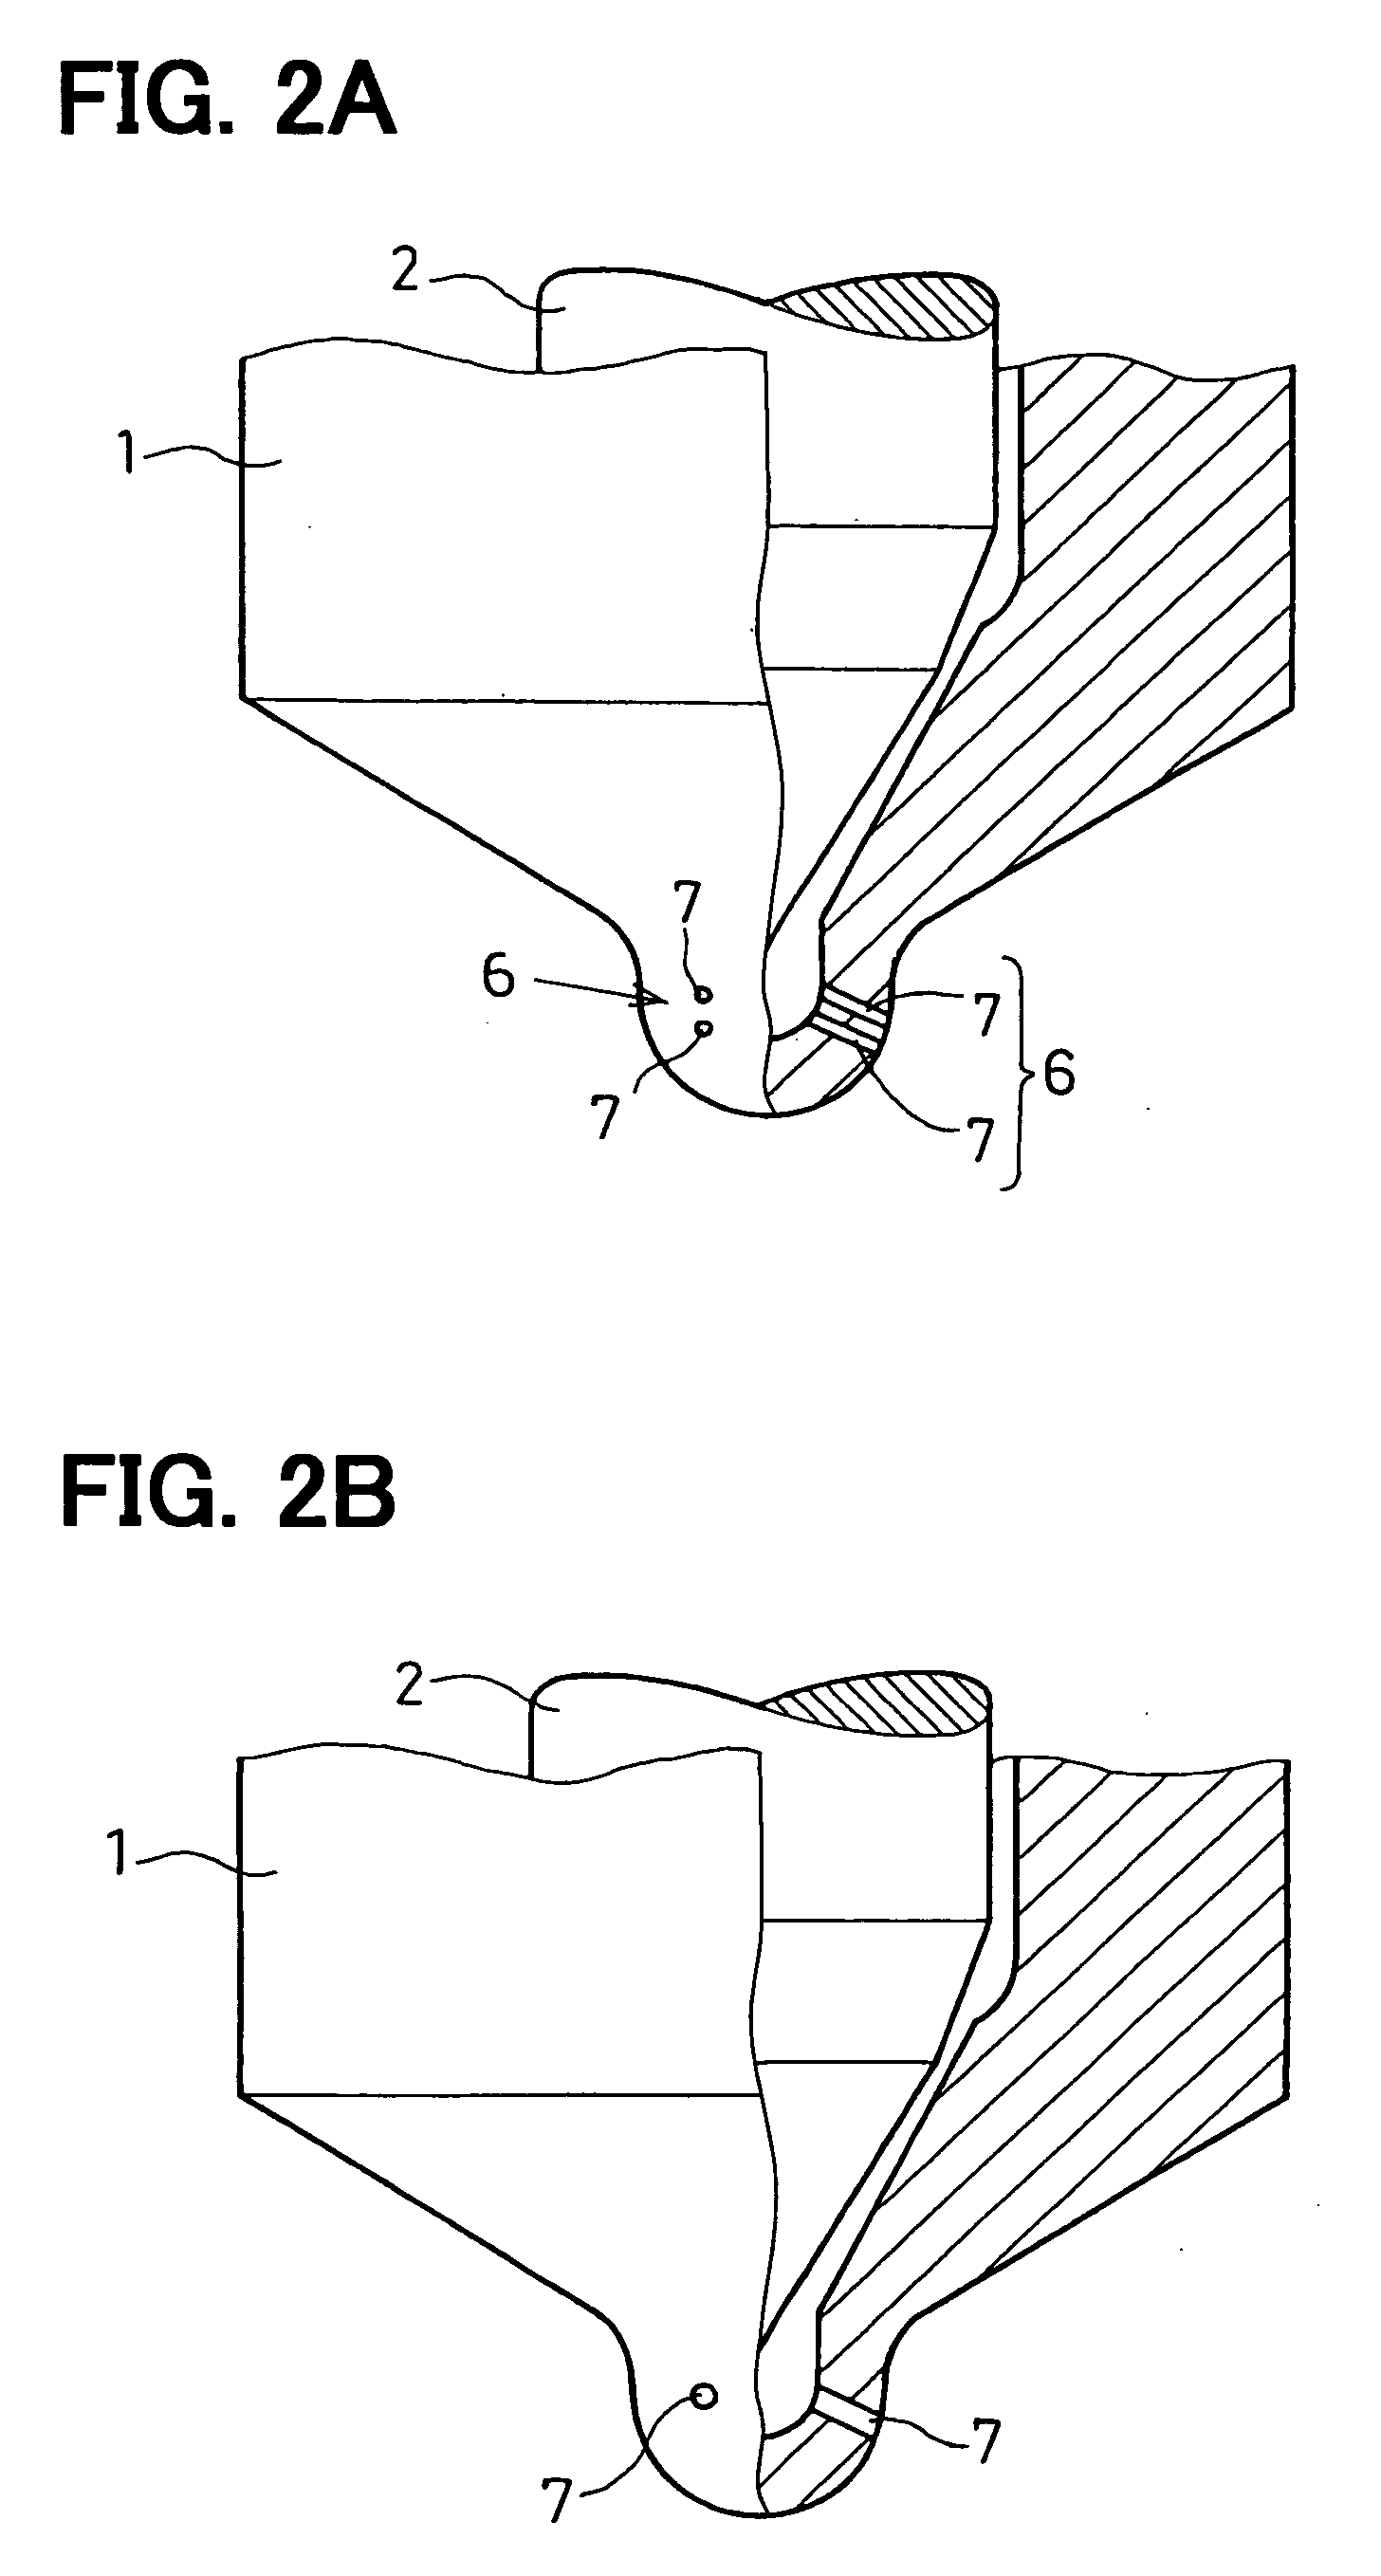 Fuel injection nozzle having multiple injection holes